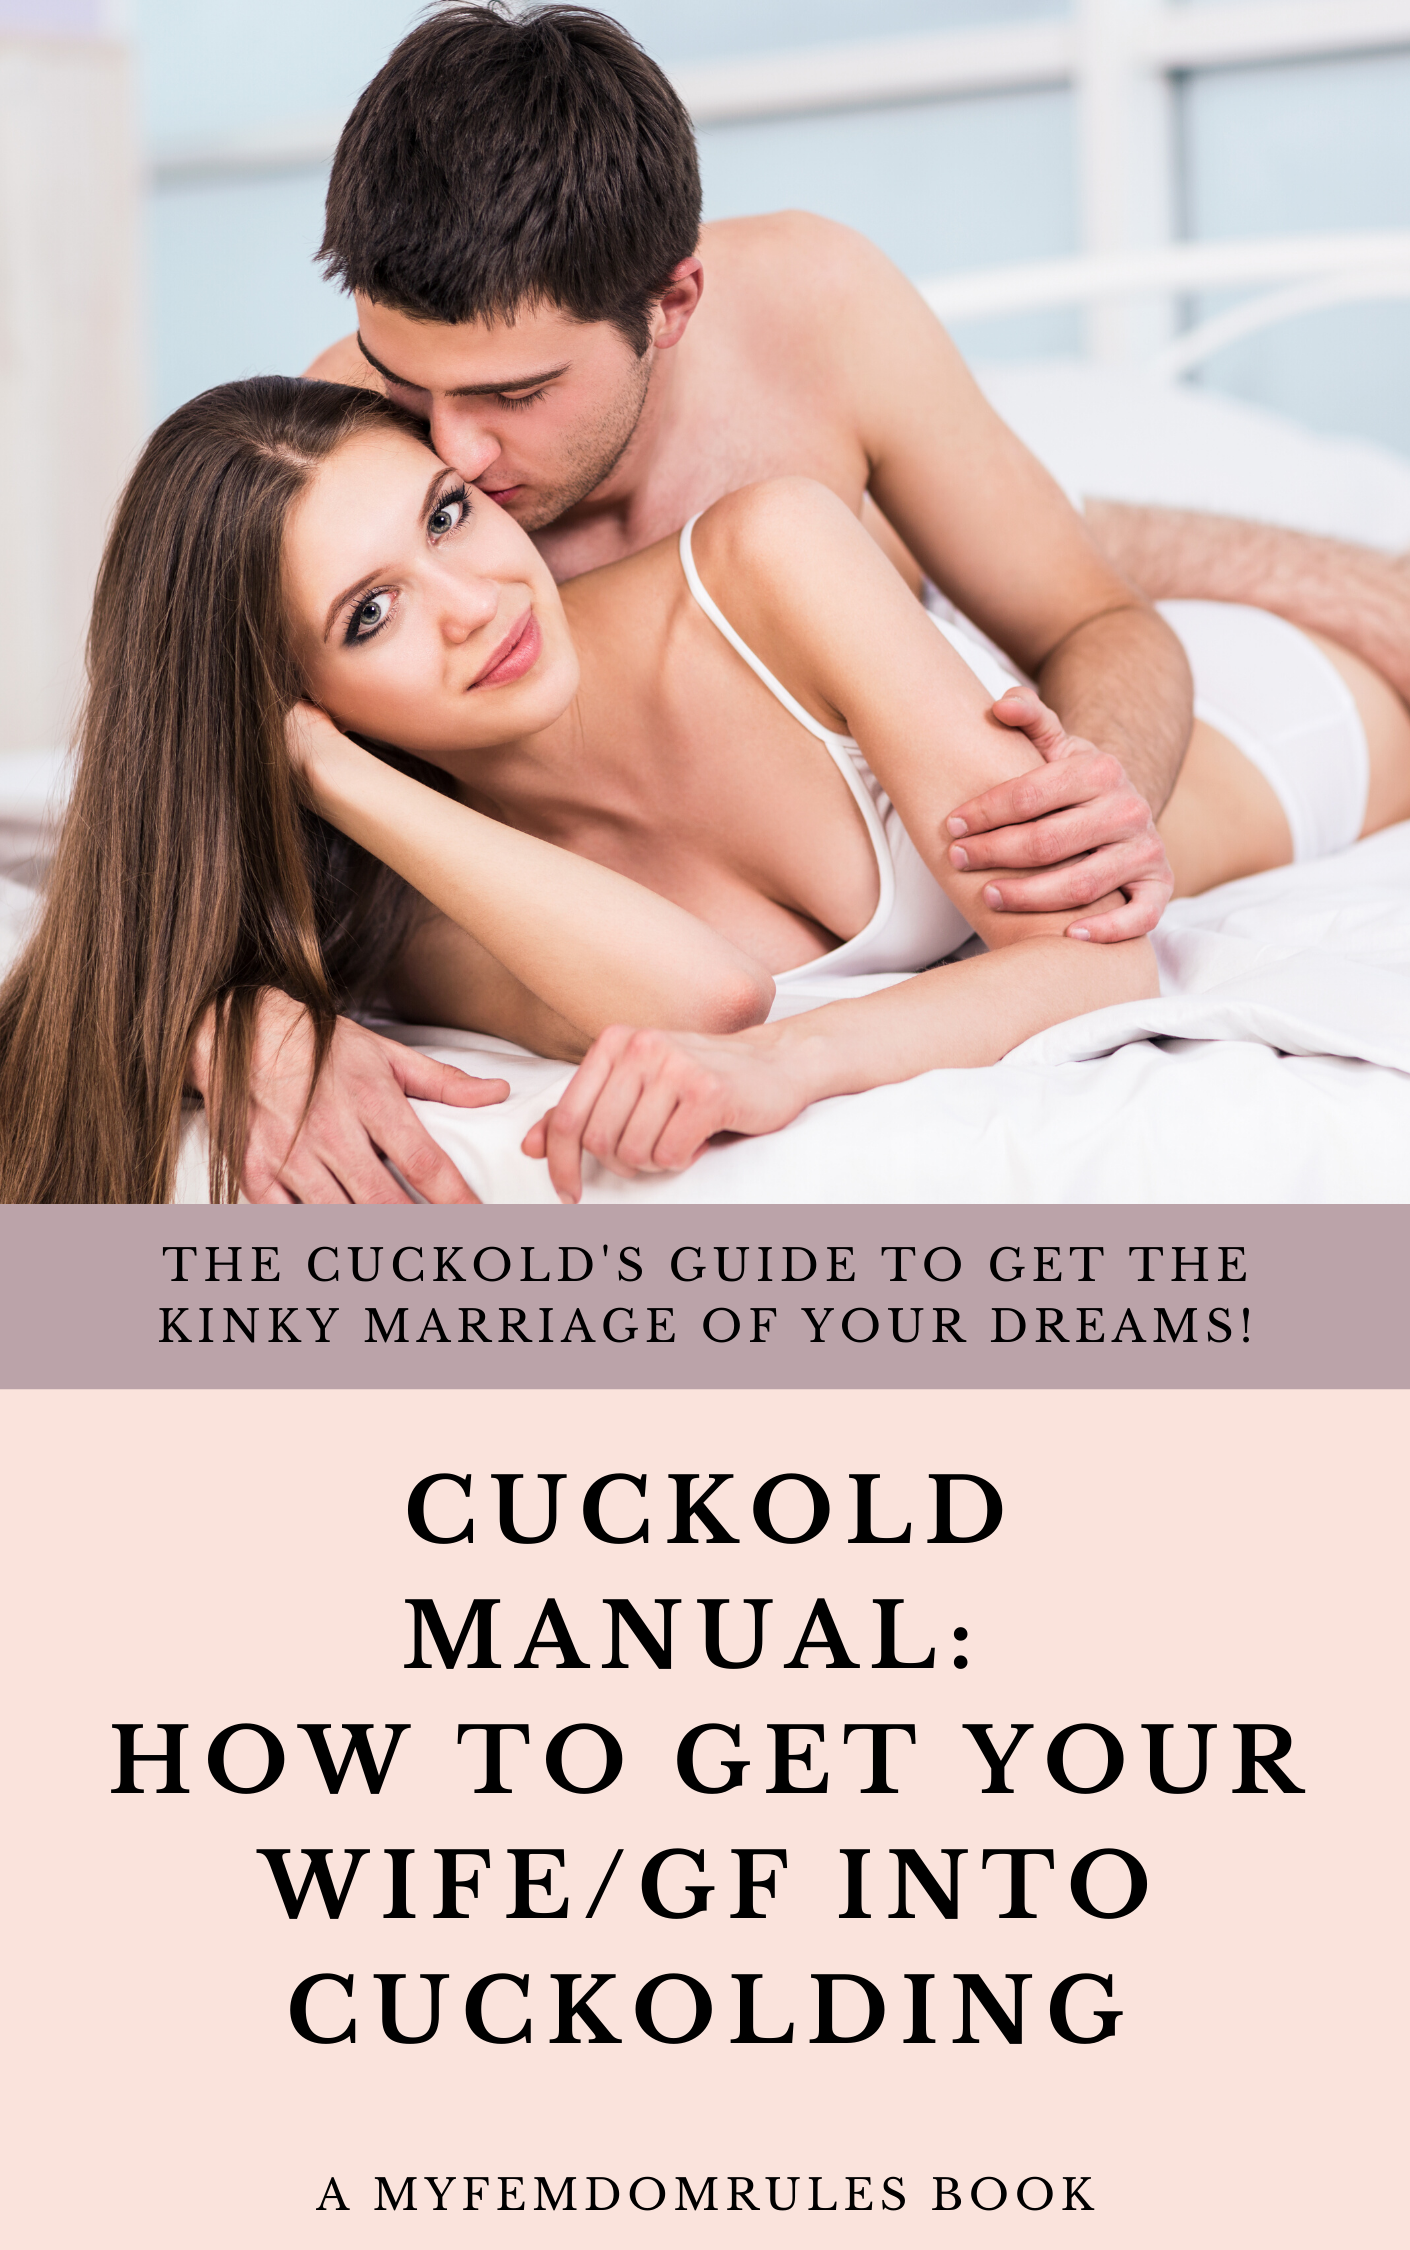 Cuckold Manual How To Get Your Wife/Girlfriend Into Cuckolding (eBook) picture